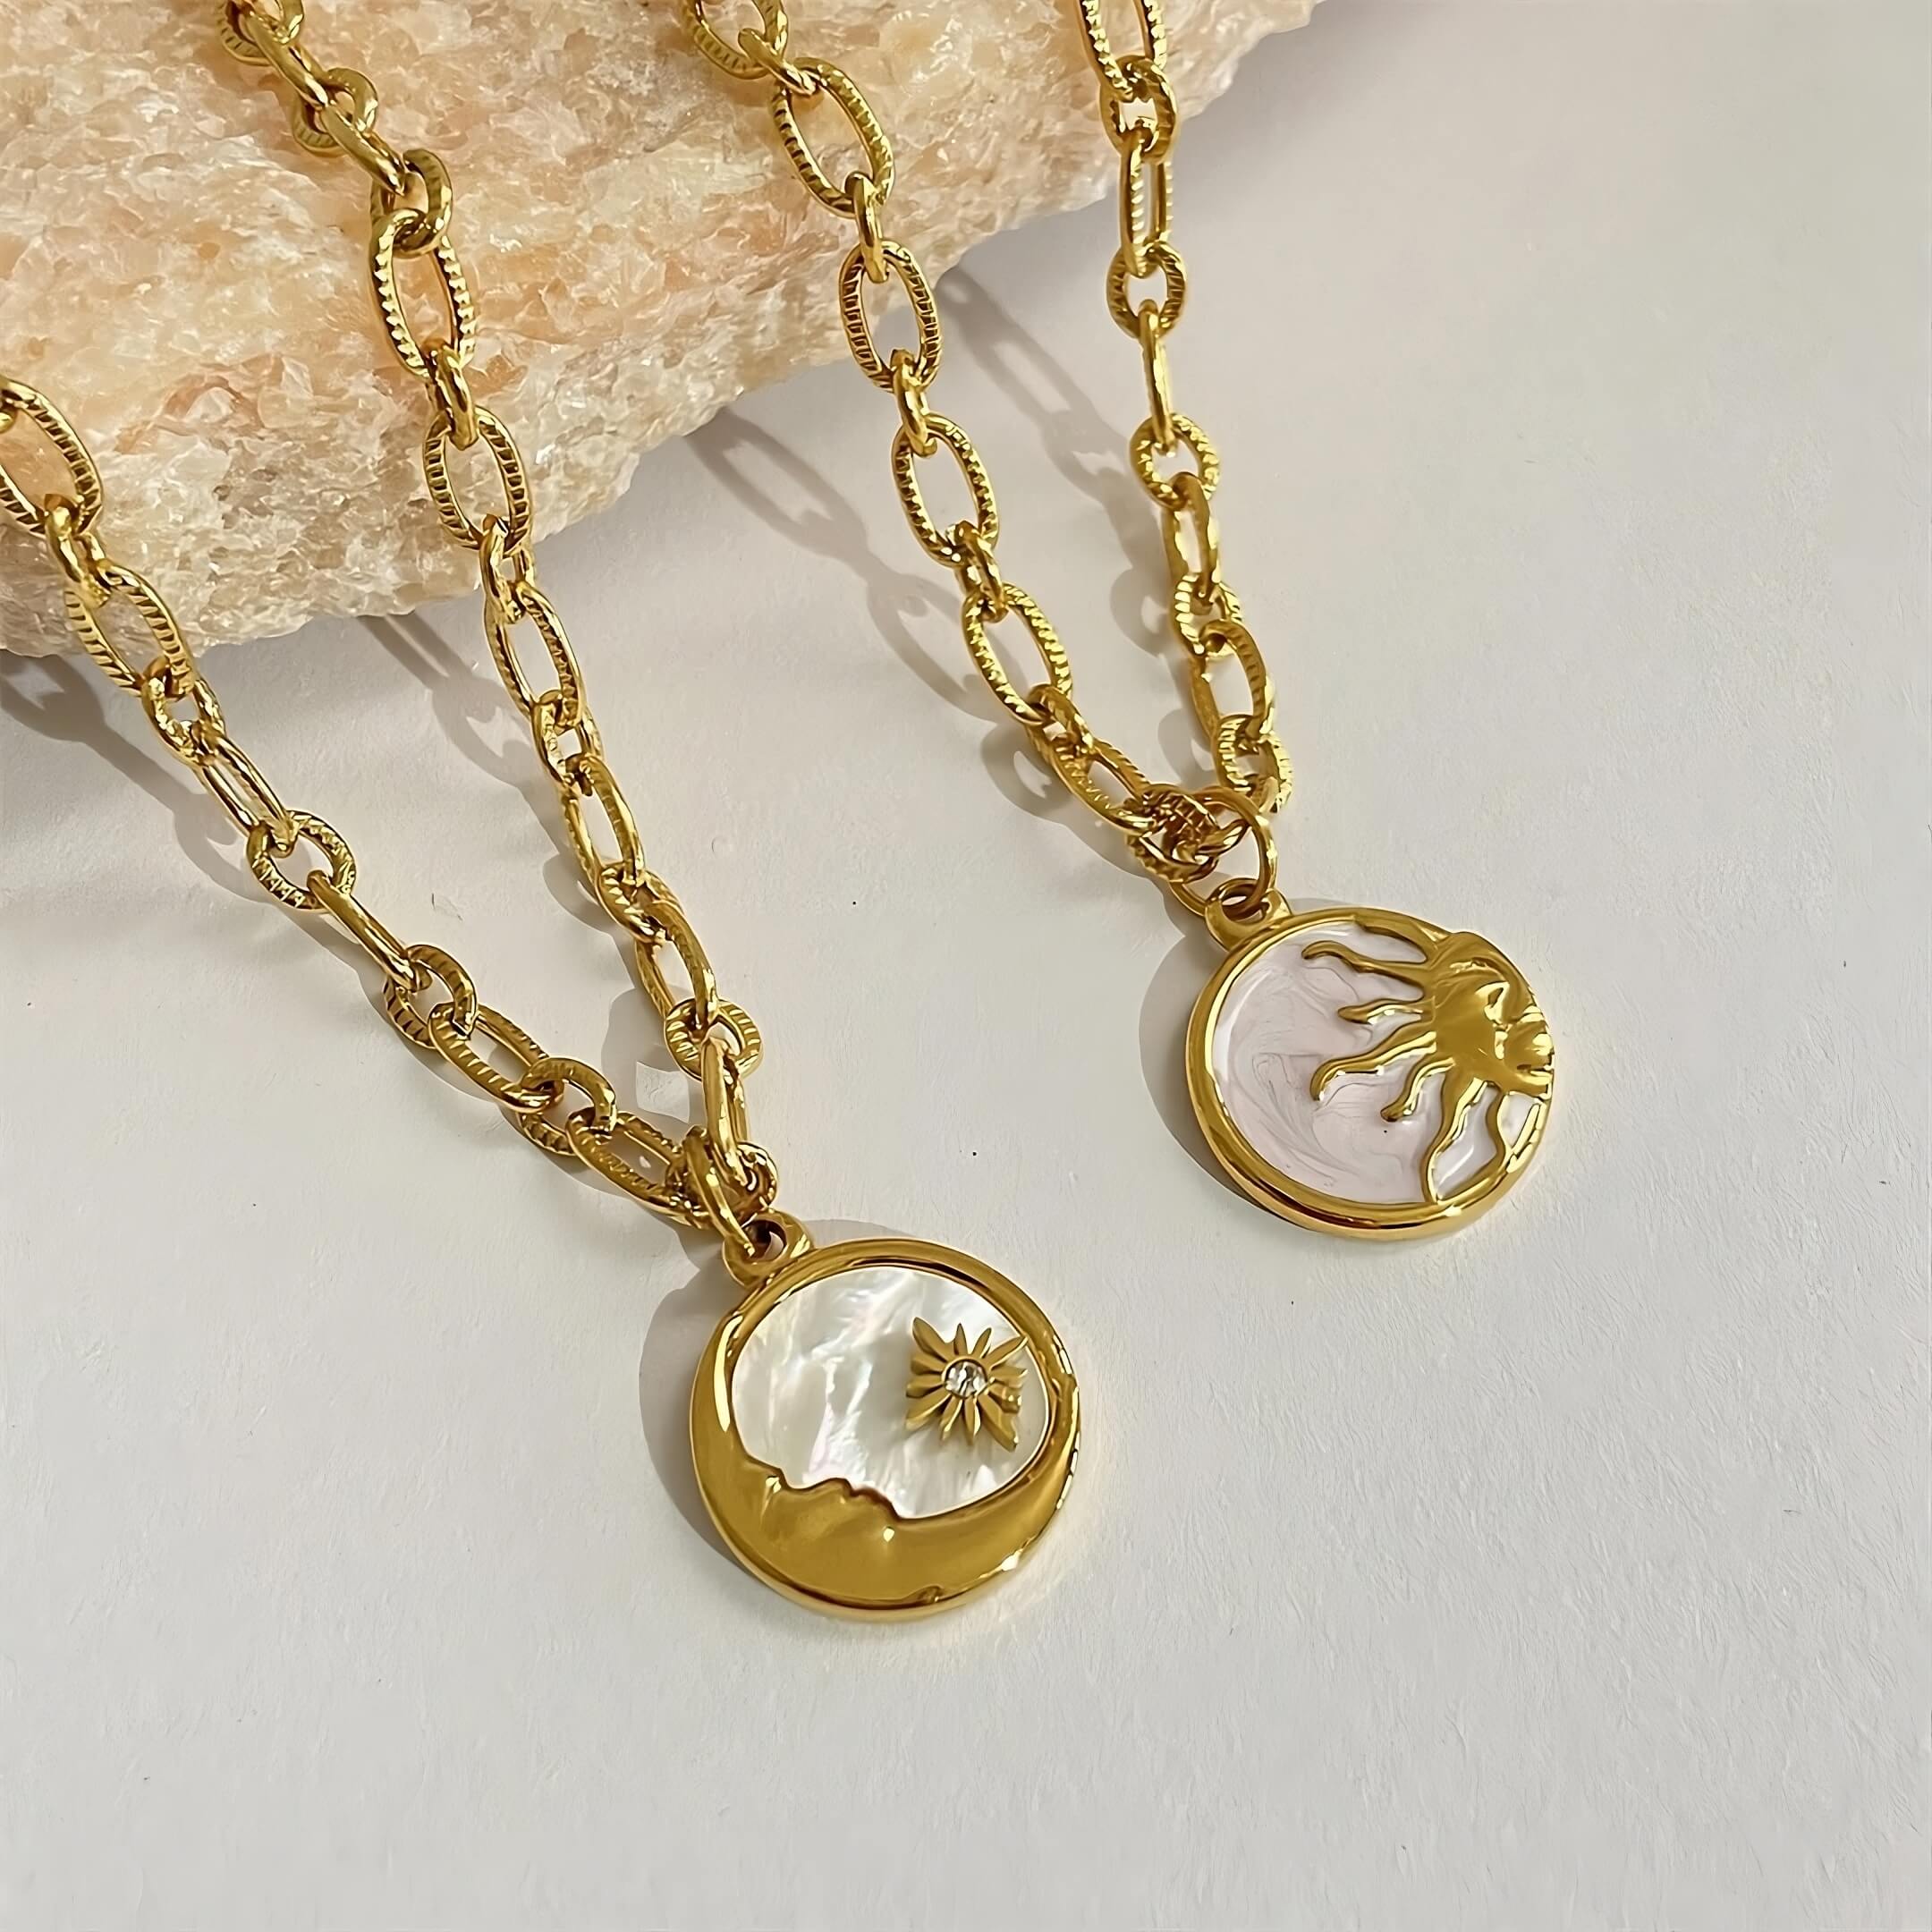 Stellar-Skeleton-Pearlescent-Shell-Sun-Moon-Coin-Necklace-2-transformed